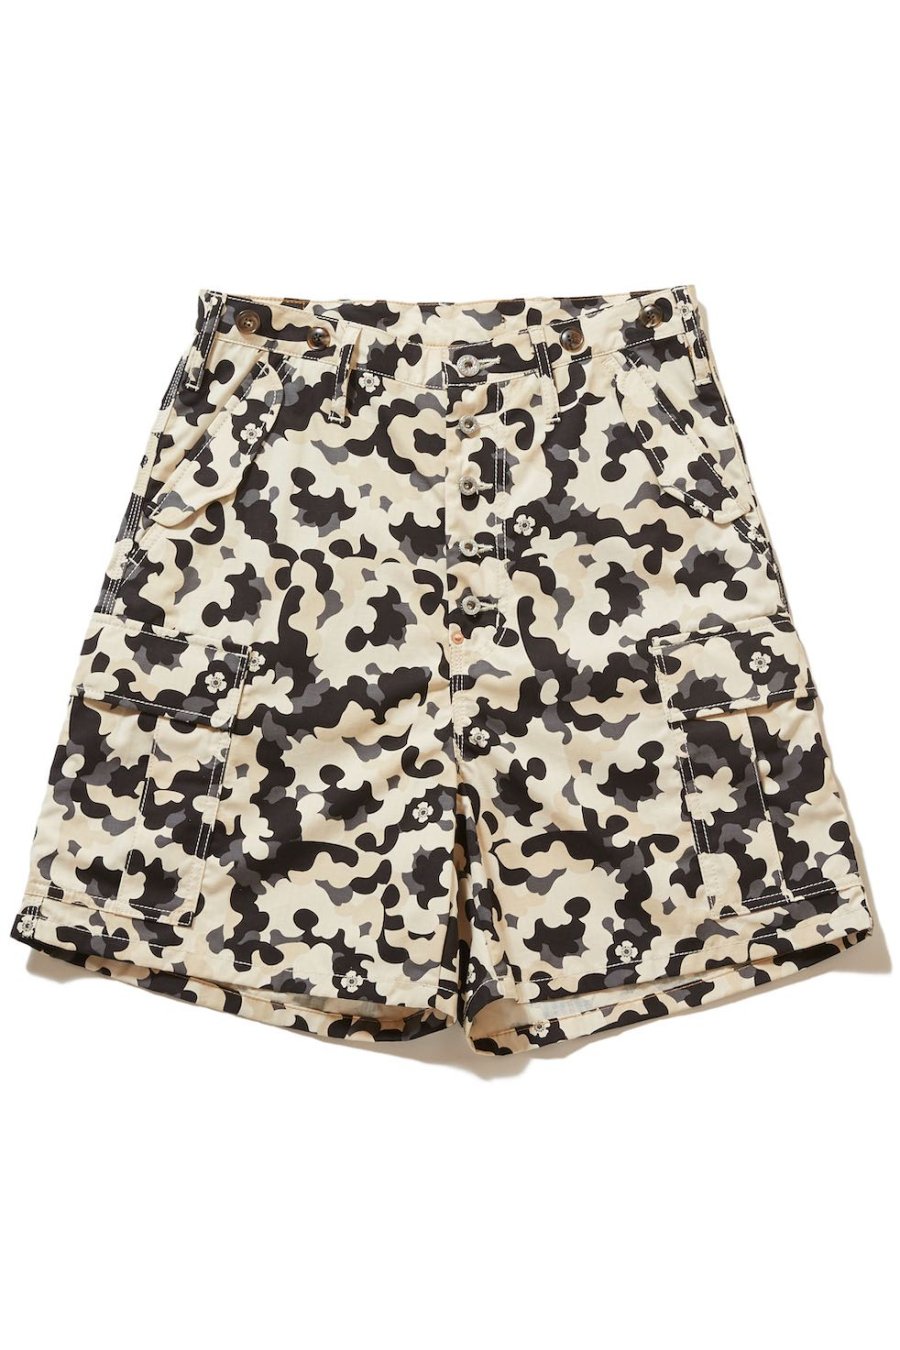 SUGARHILL  FLOWER CAMO CARGO SHORT TROUSERS( BEIGE CAMO)<img class='new_mark_img2' src='https://img.shop-pro.jp/img/new/icons15.gif' style='border:none;display:inline;margin:0px;padding:0px;width:auto;' />